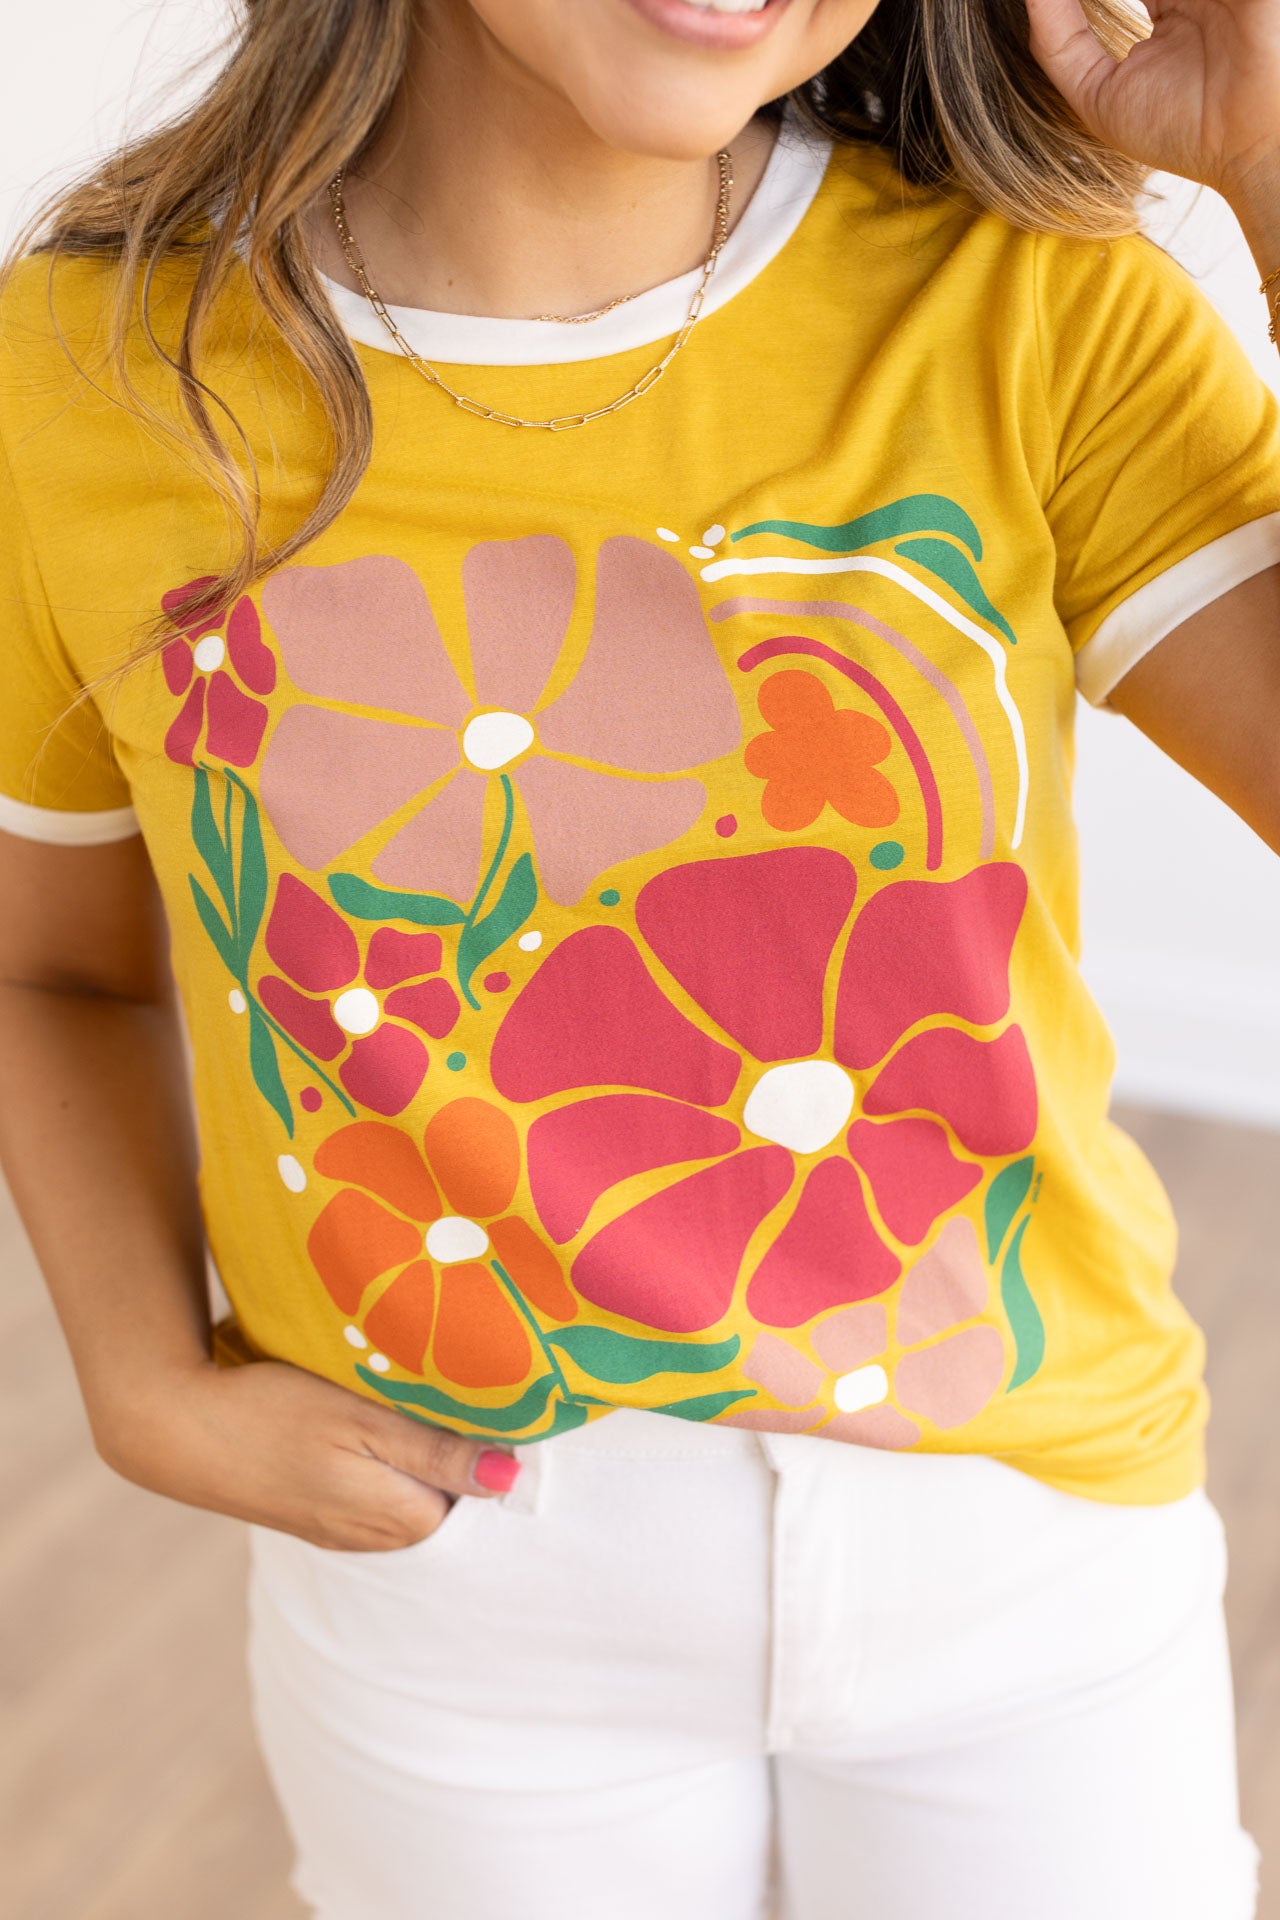 Floral Short Sleeves T-Shirt, White And Mustard